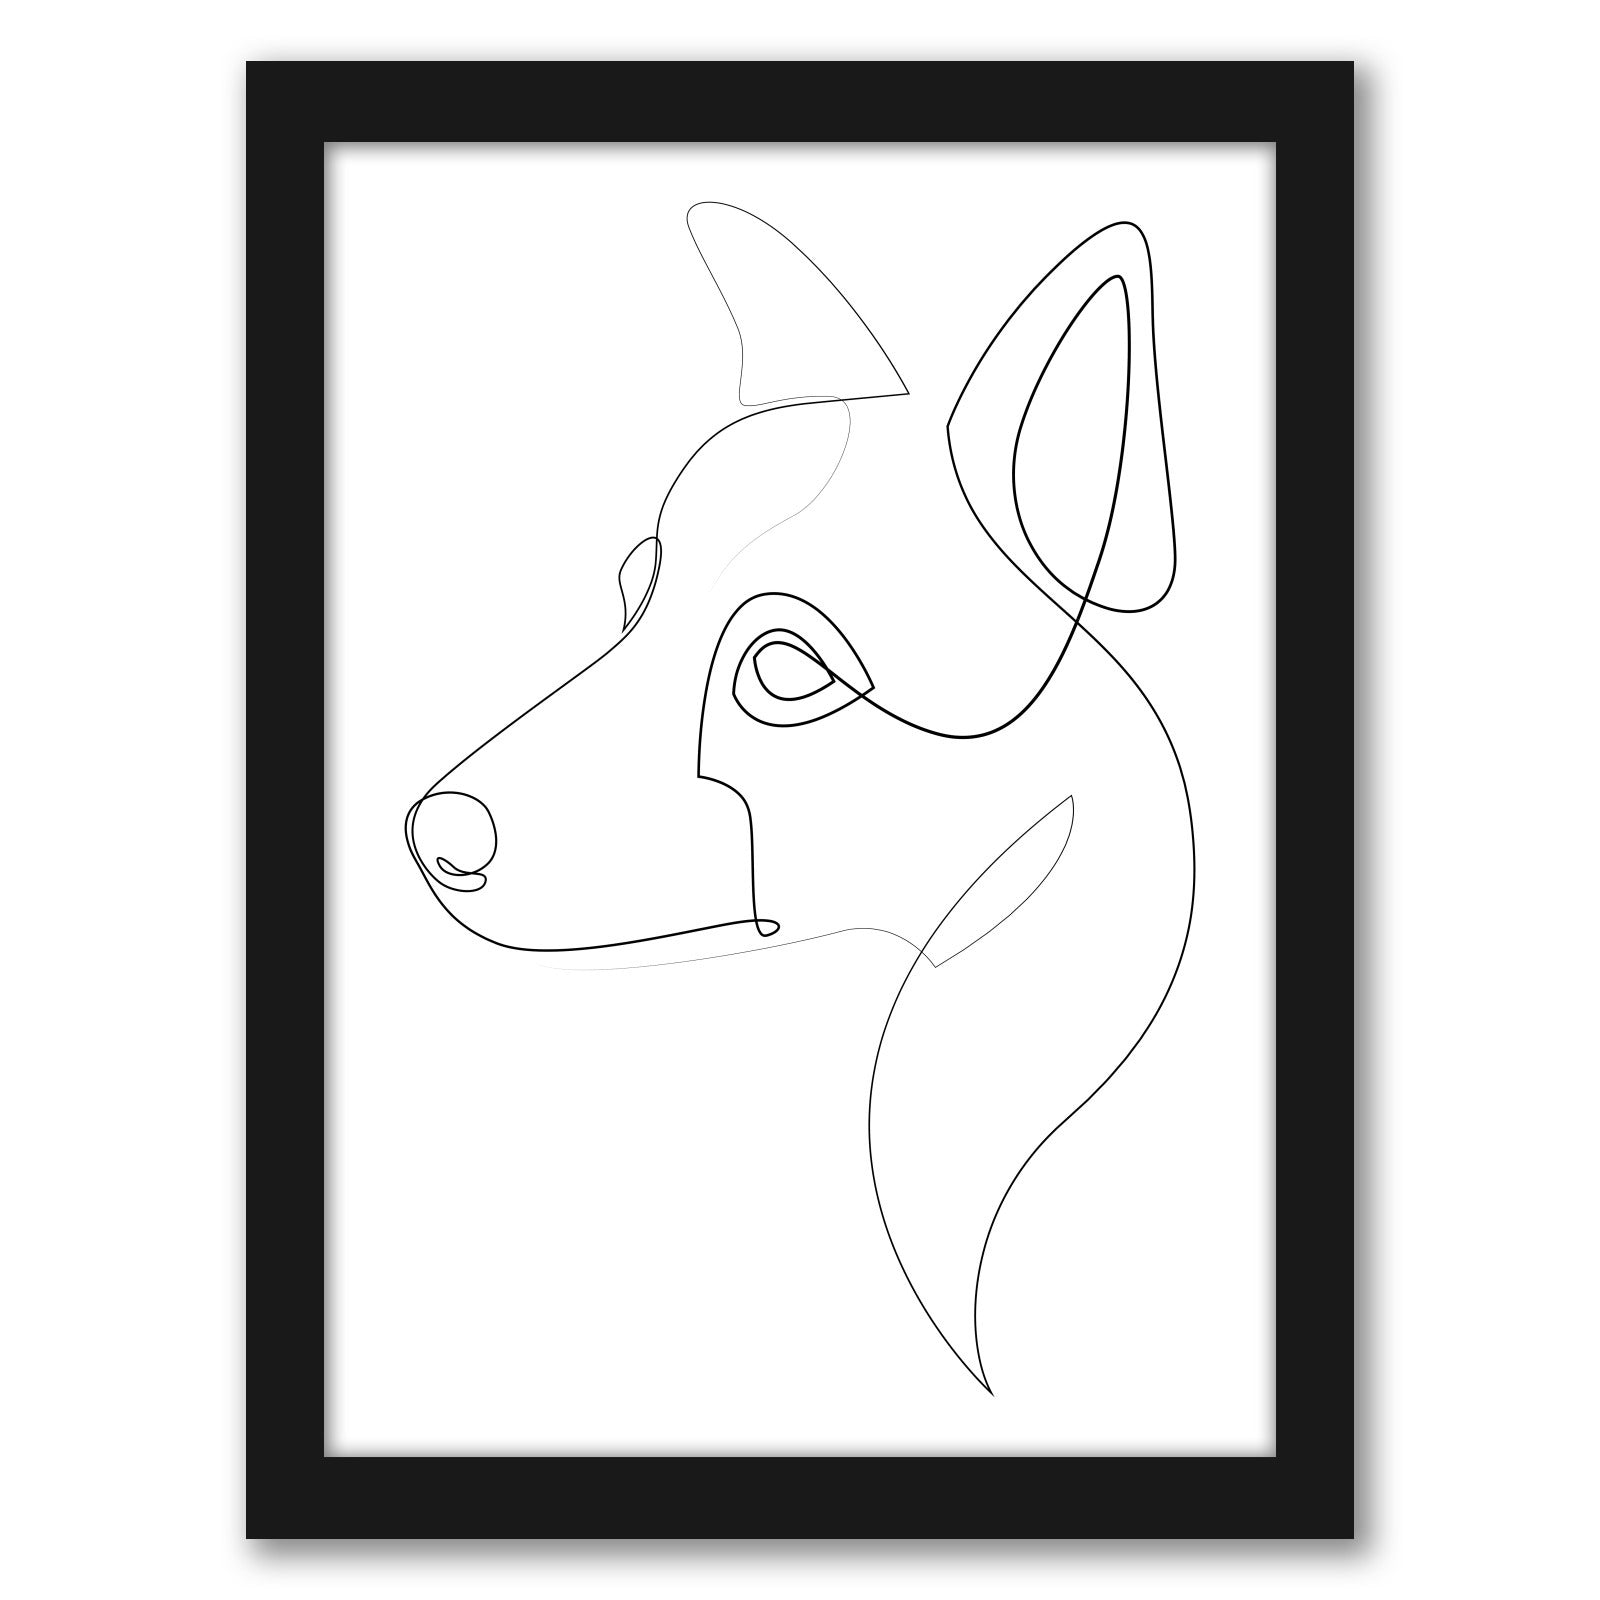 Border Collie One Line by Addillum - Canvas, Poster or Framed Print